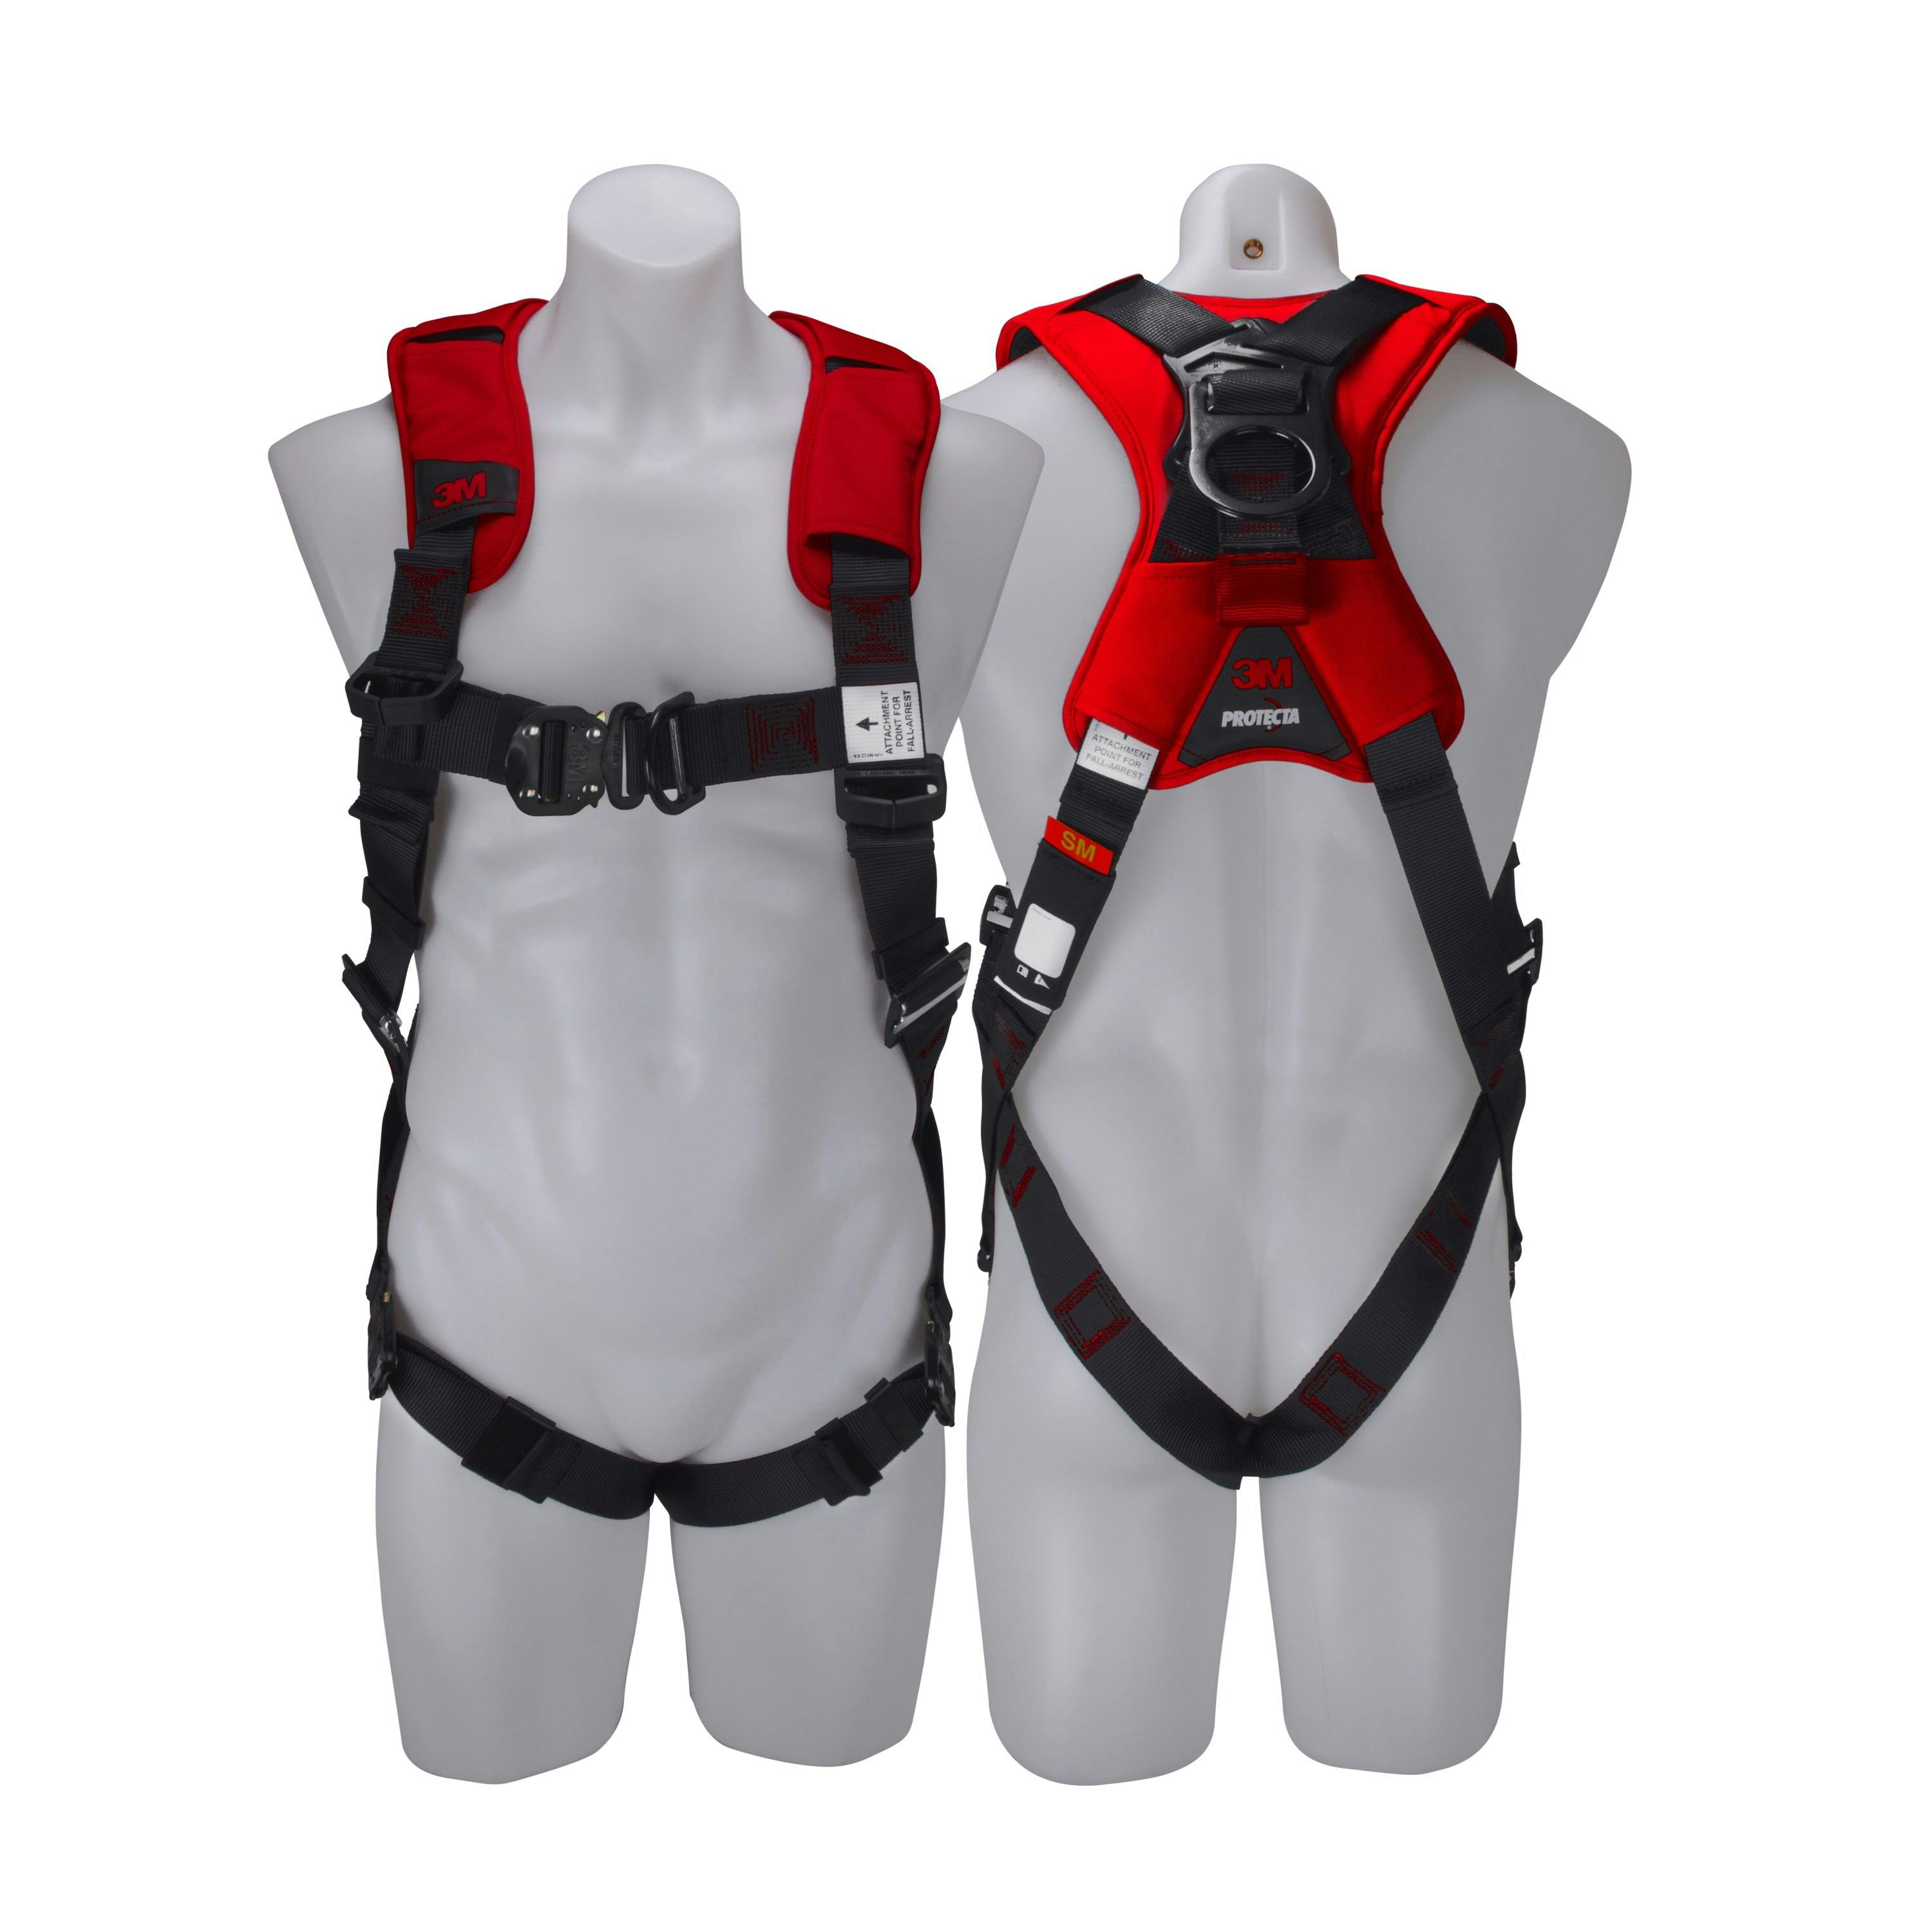 3M™ PROTECTA® X Riggers Harness with Padding 1161677, Red and Black, Medium, 1 EA/Case